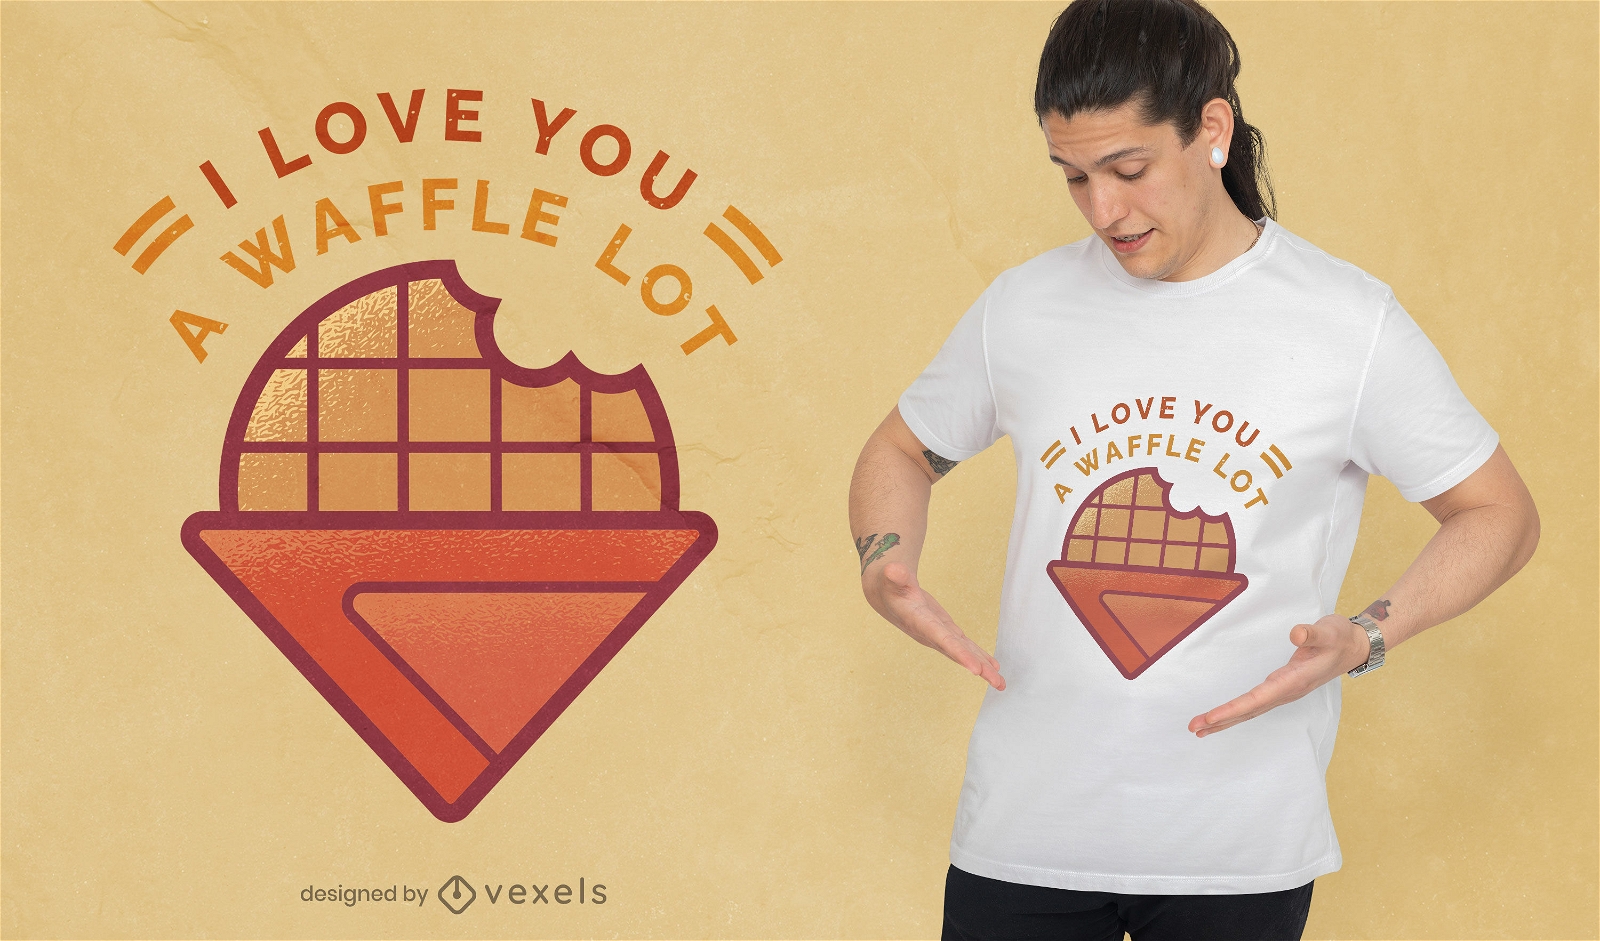 Waffle love quote t-shirt design